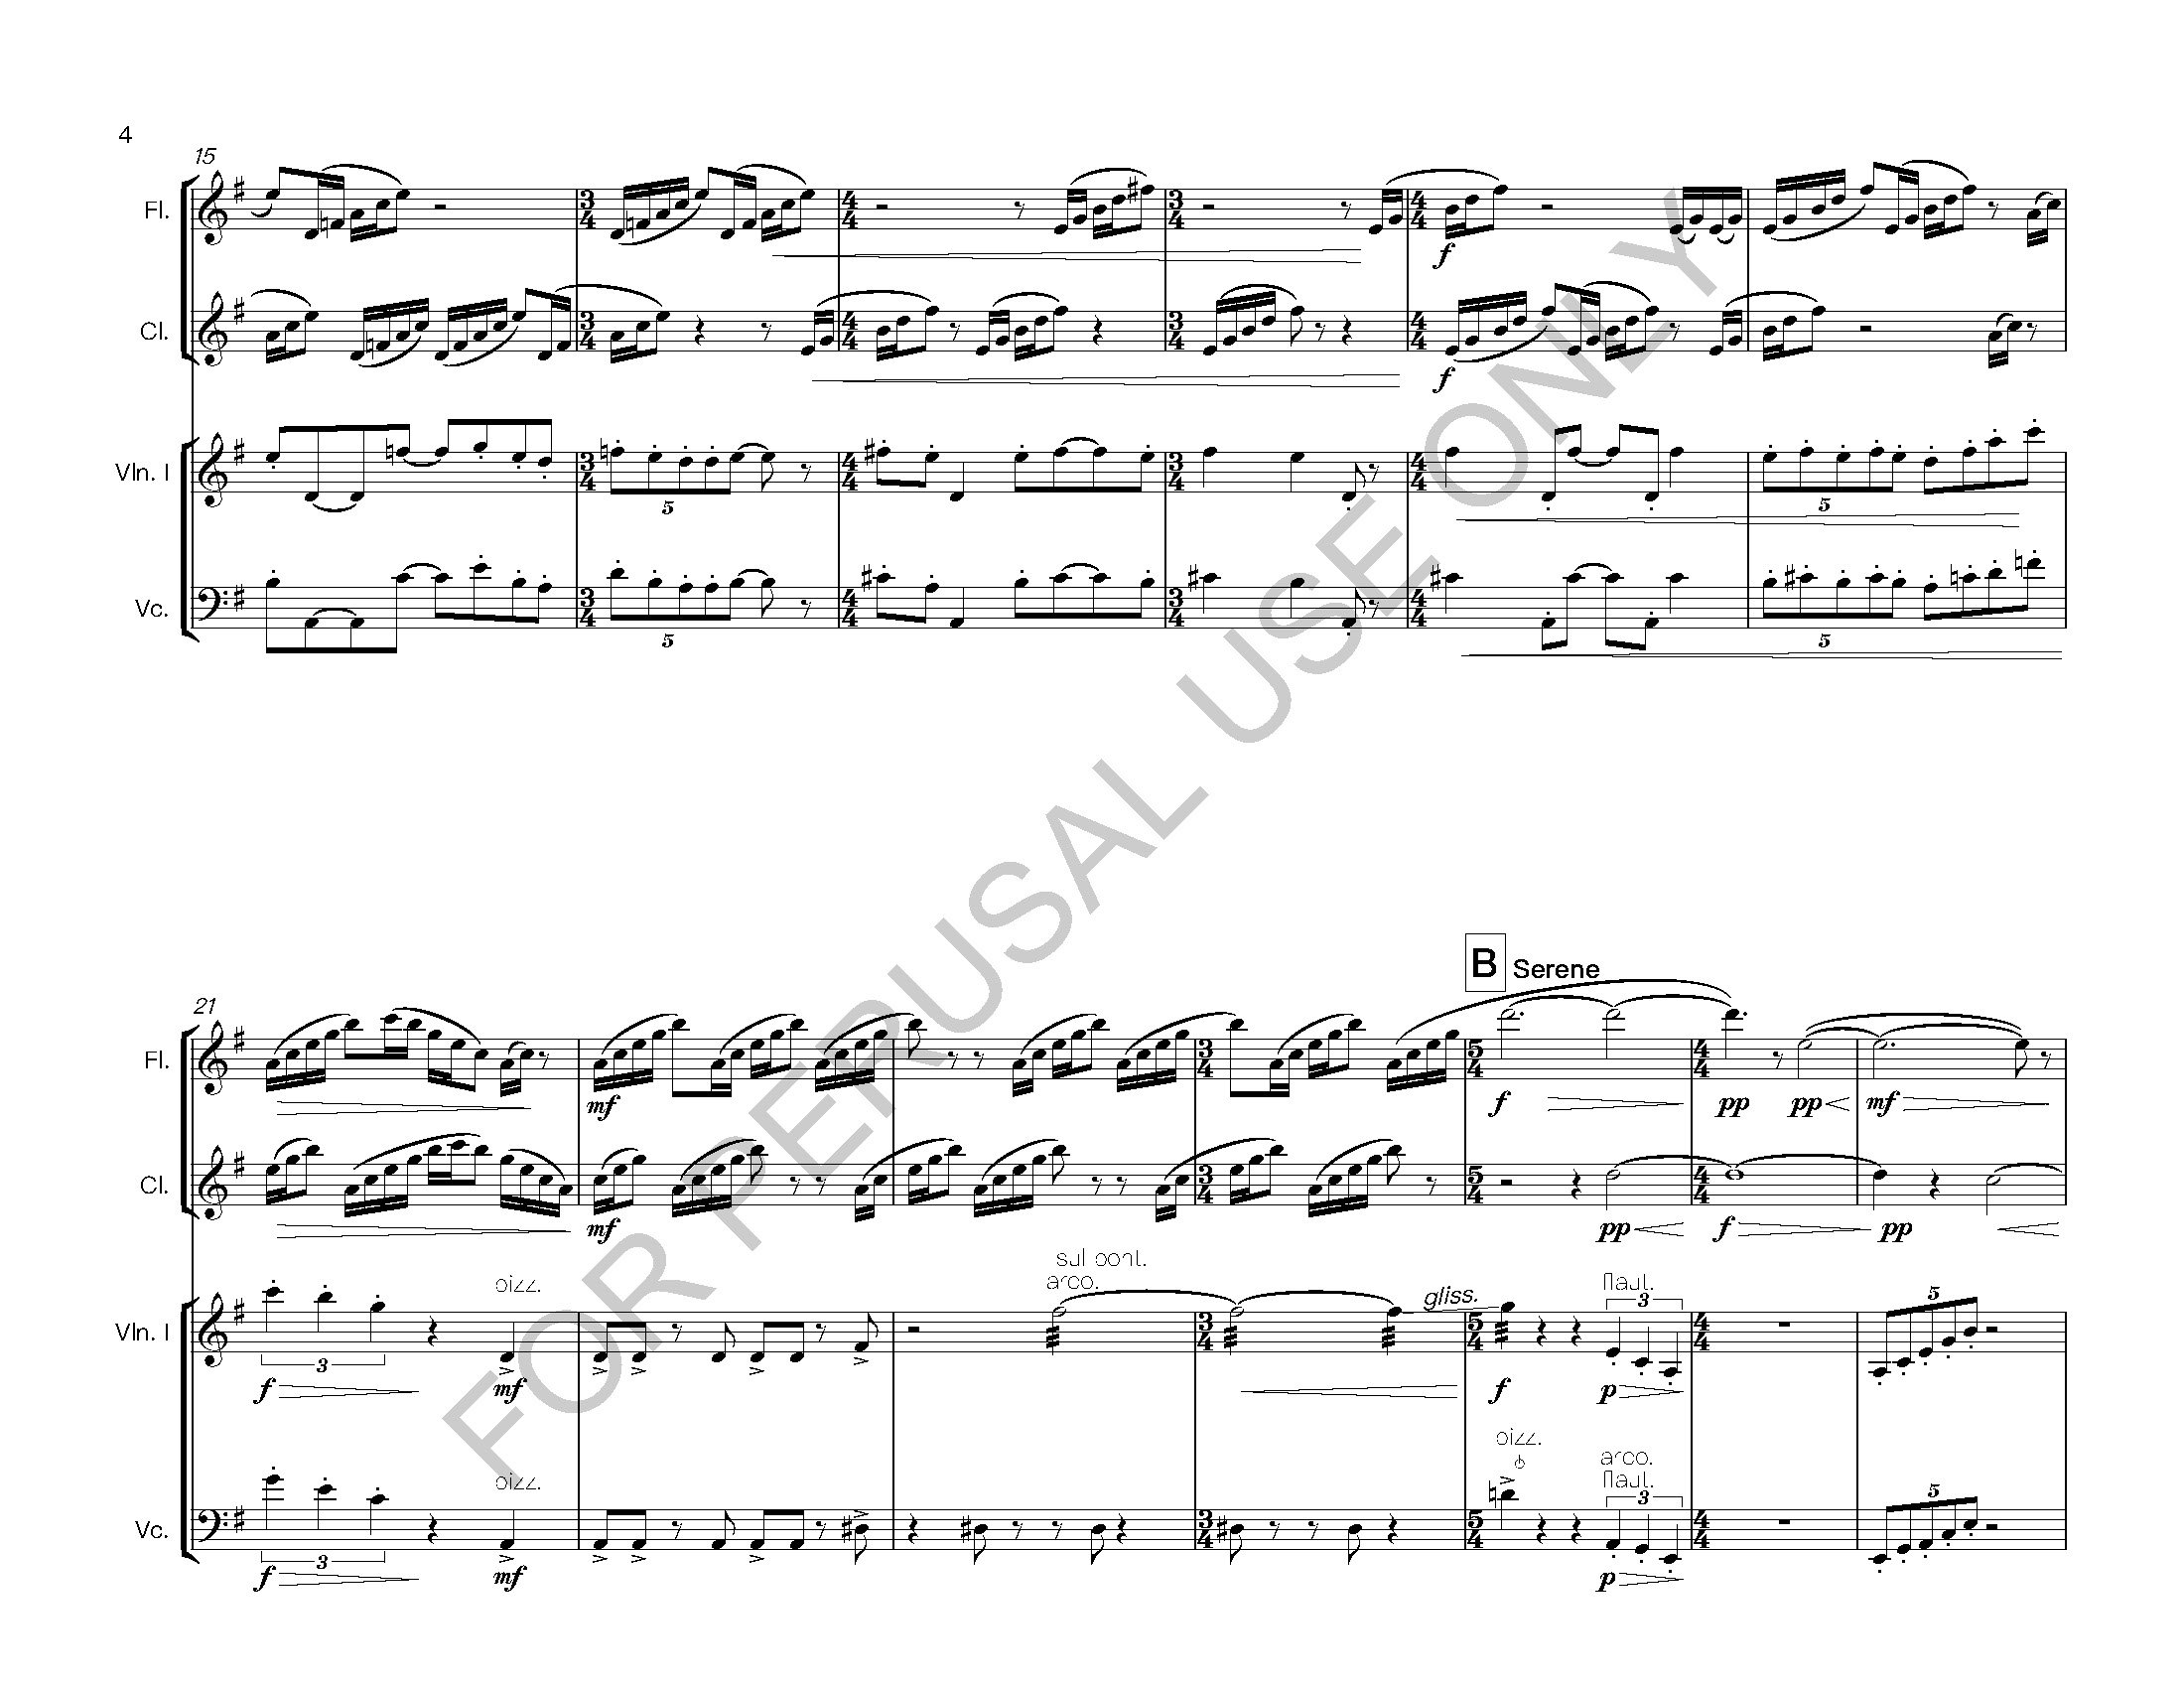 Thread the Needle - Full Score in C_Page_04.jpg